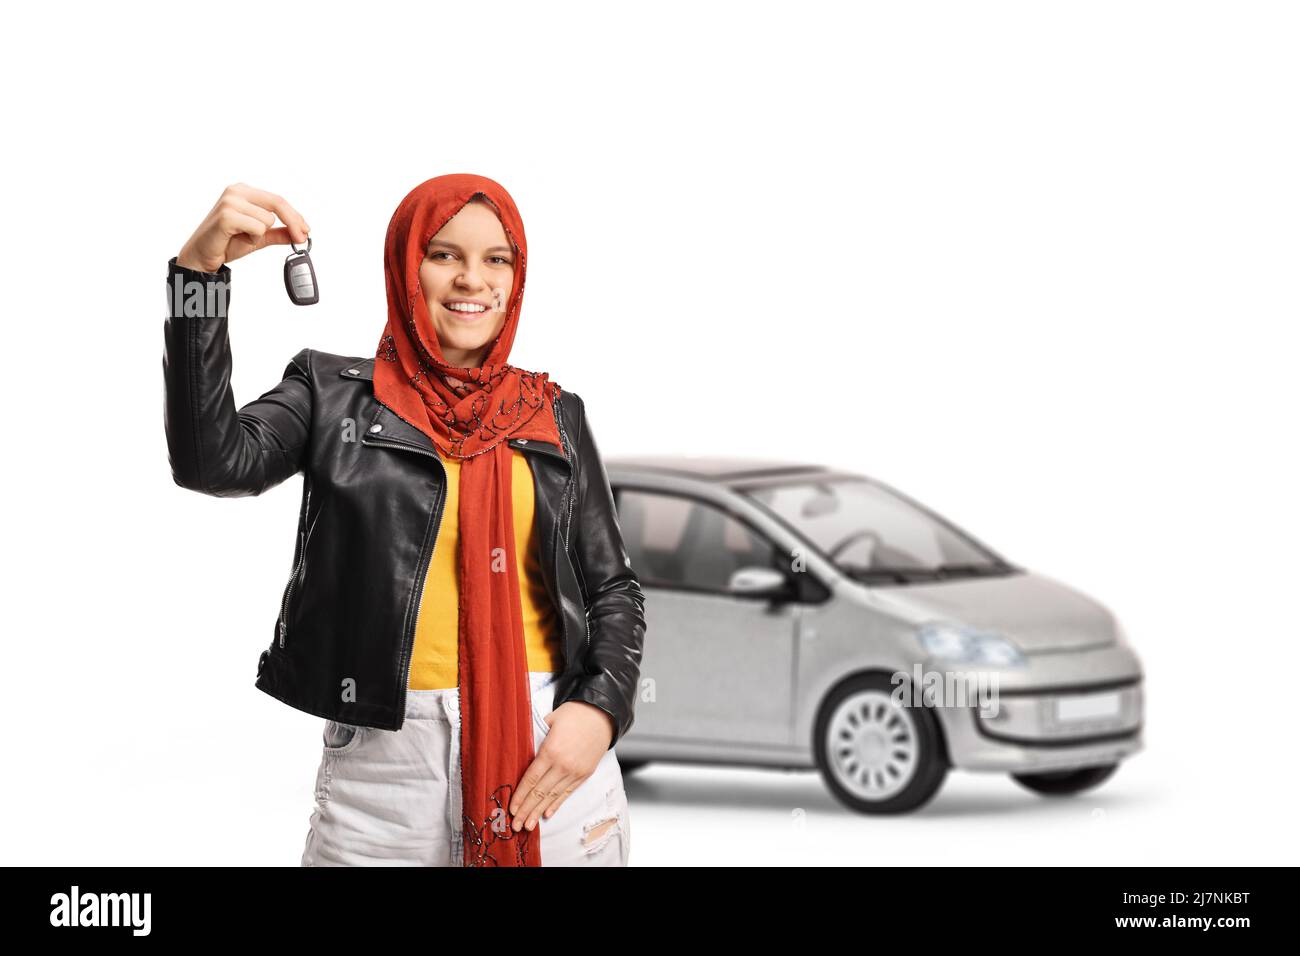 Young woman with a hijab and a leather jacket holding car keys and smiling isolated on white background Stock Photo